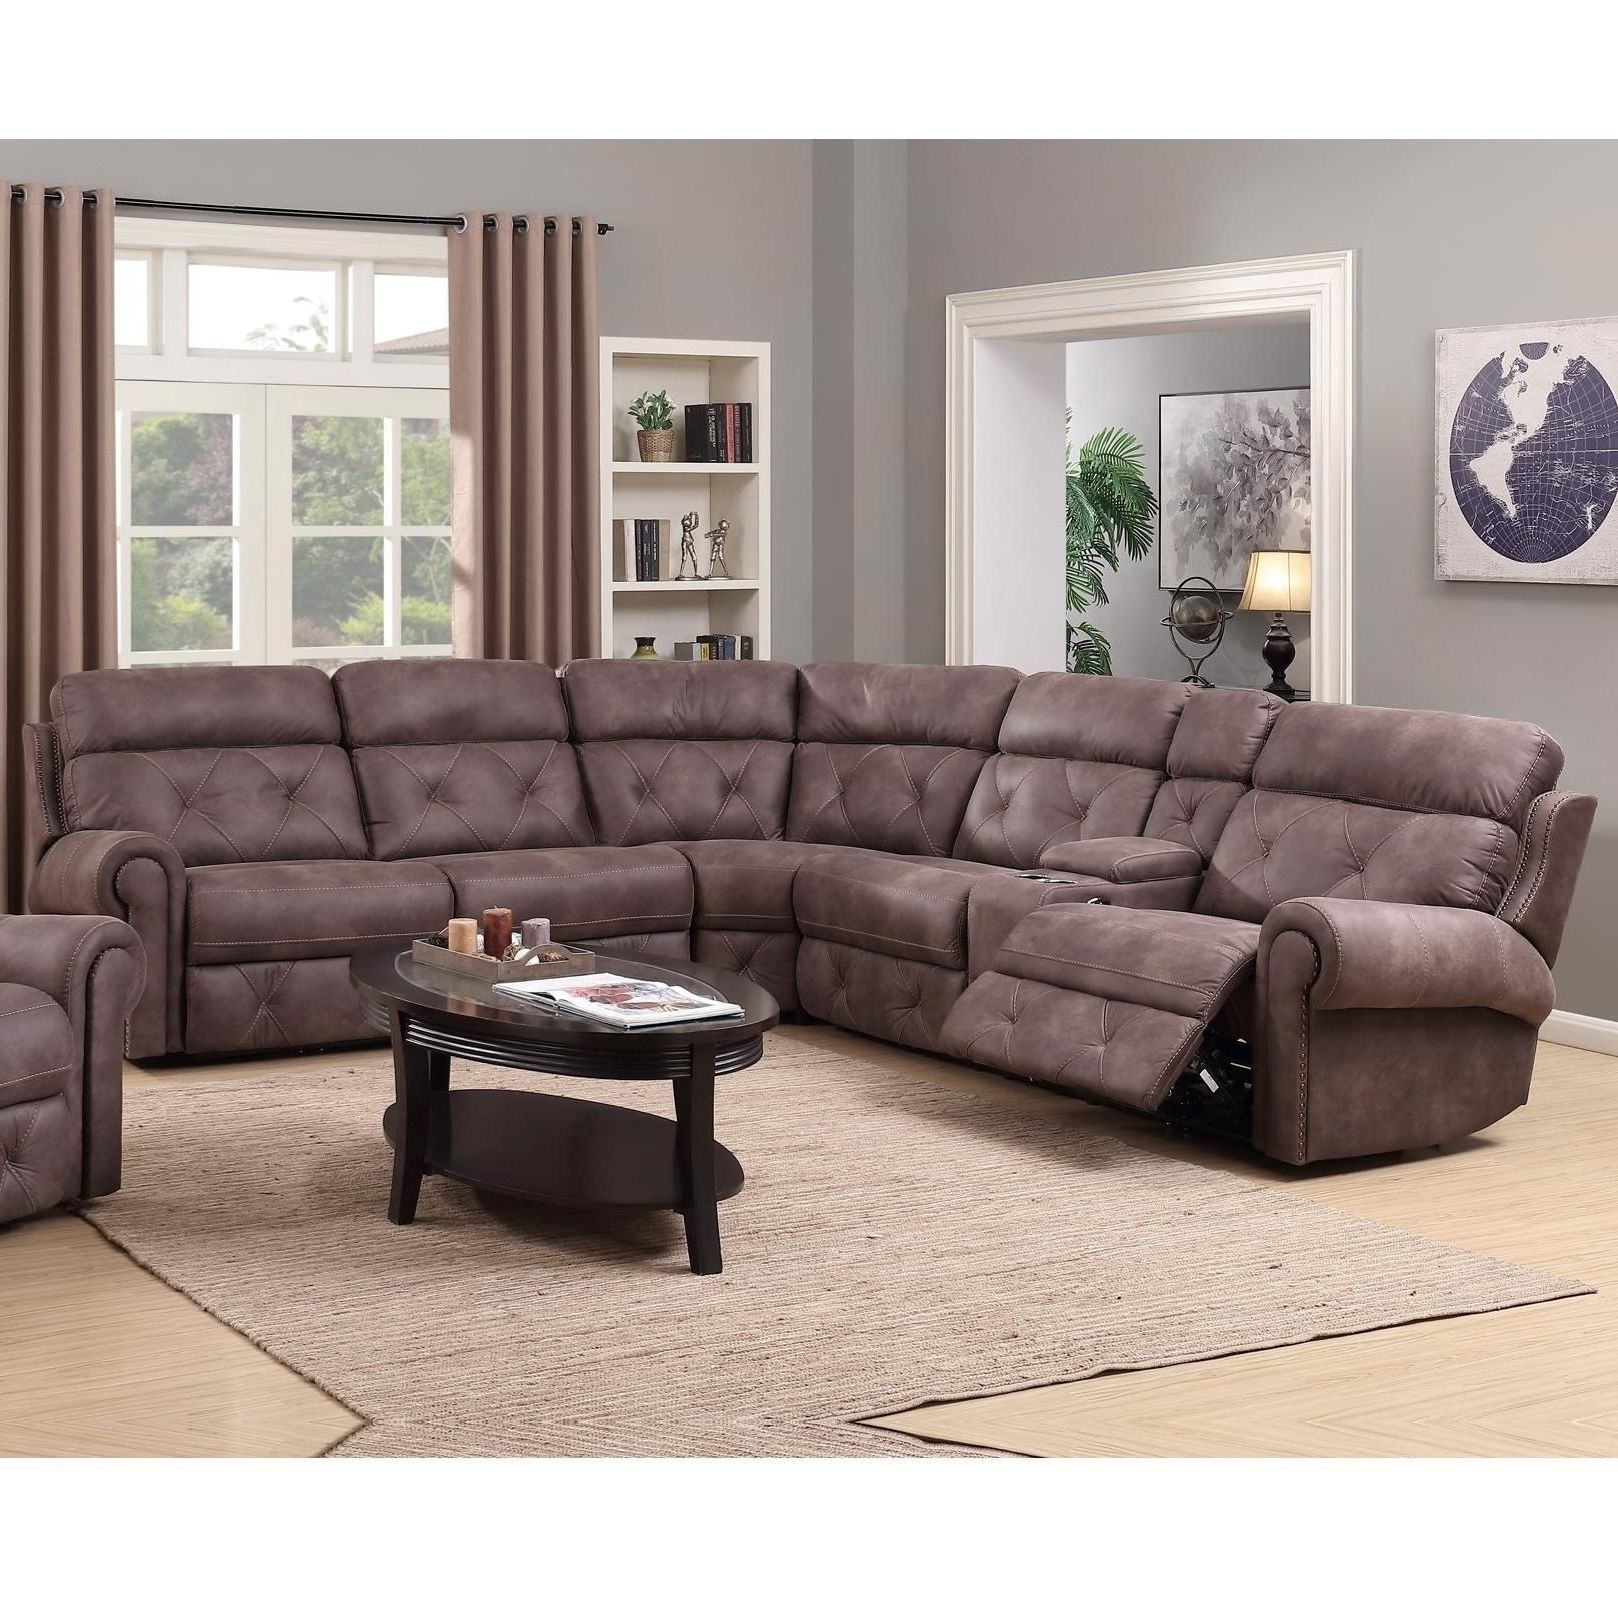 Royal Furniture Sectional Sofas Inside Recent Happy Leather Company 1378 Power Reclining Sectional With Console (View 1 of 20)